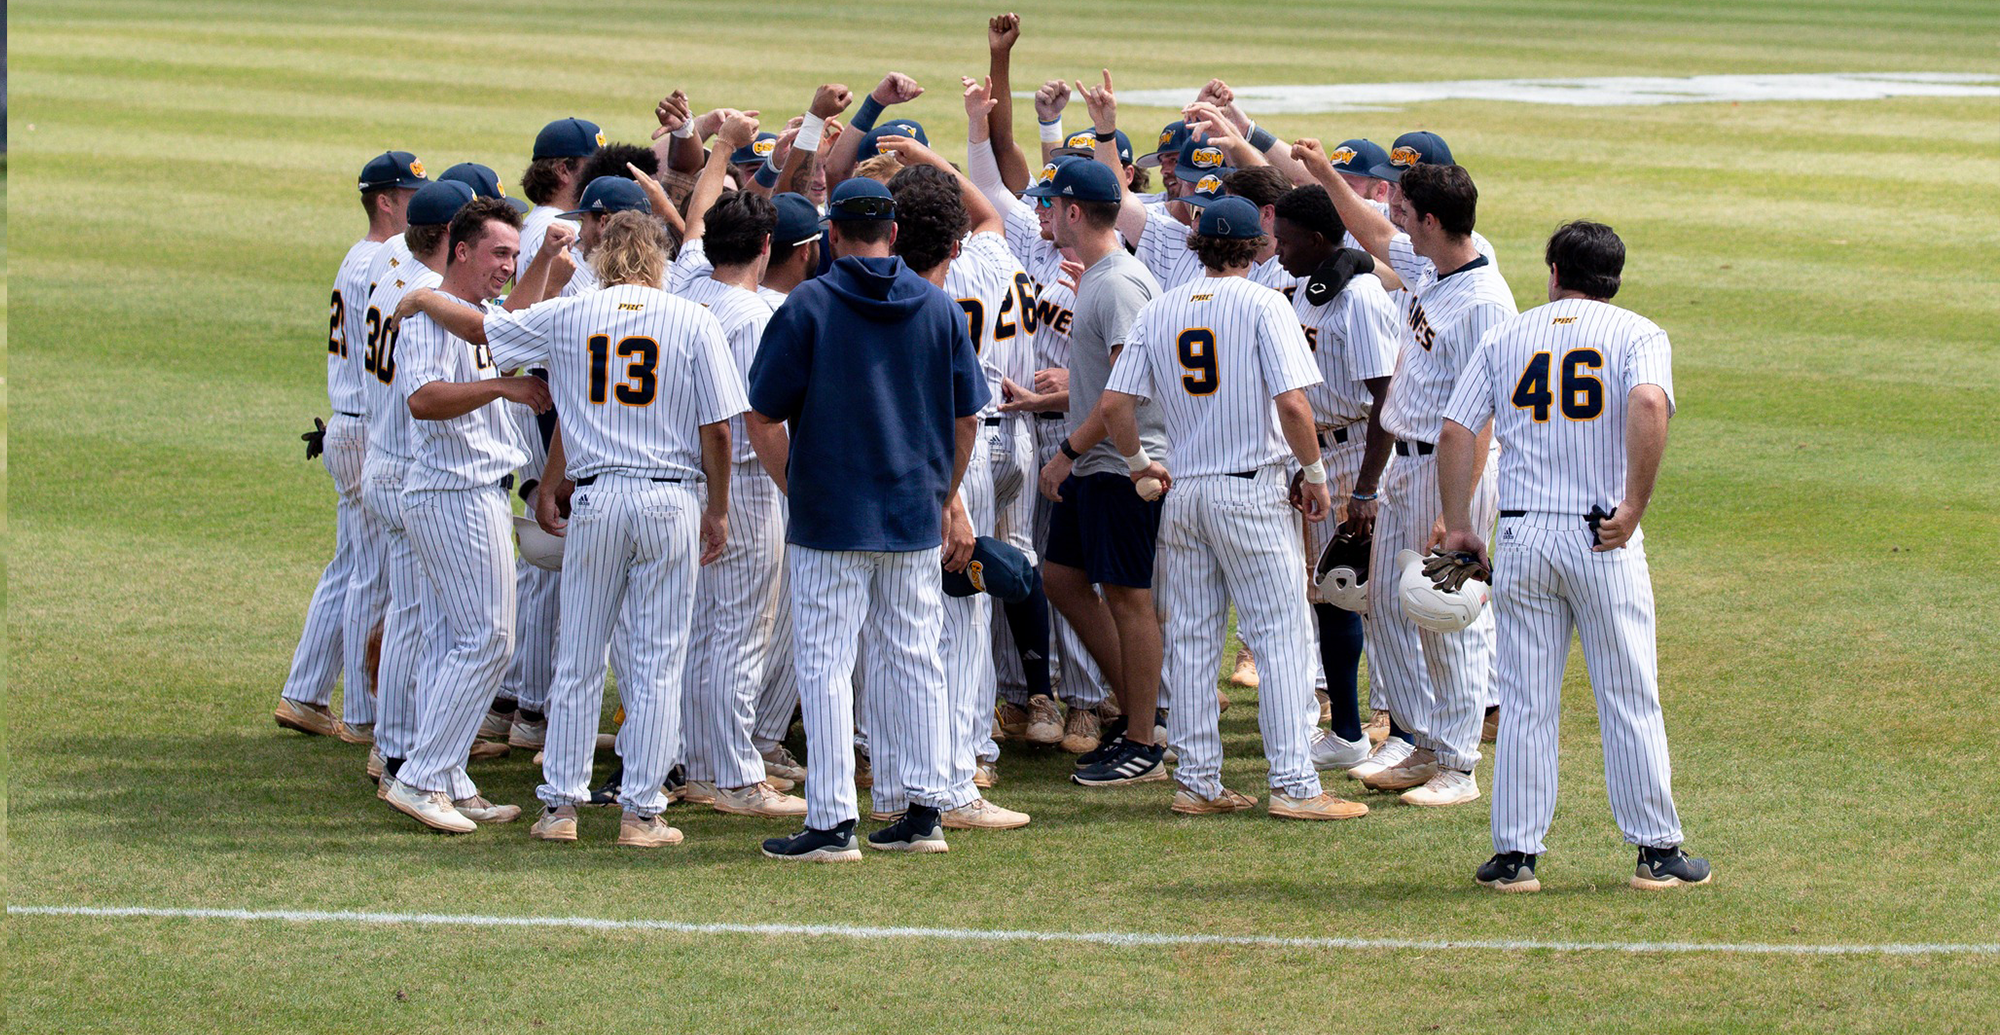 GSW Baseball releases 2020 schedule - Americus Times-Recorder